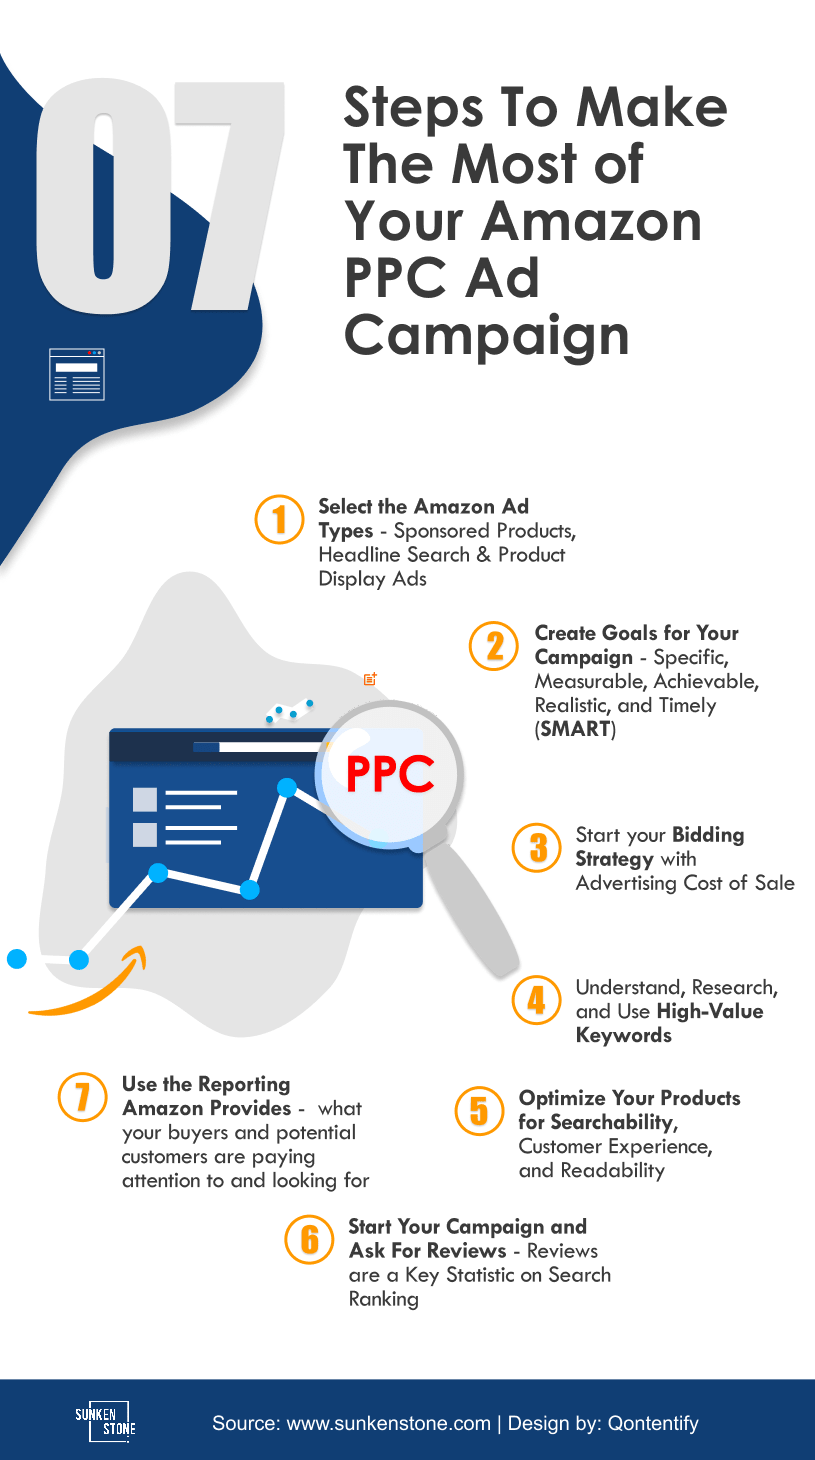 7 Step Amazon PPC Tutorial To Make The Most of Your Ad Campaign Sunken stone